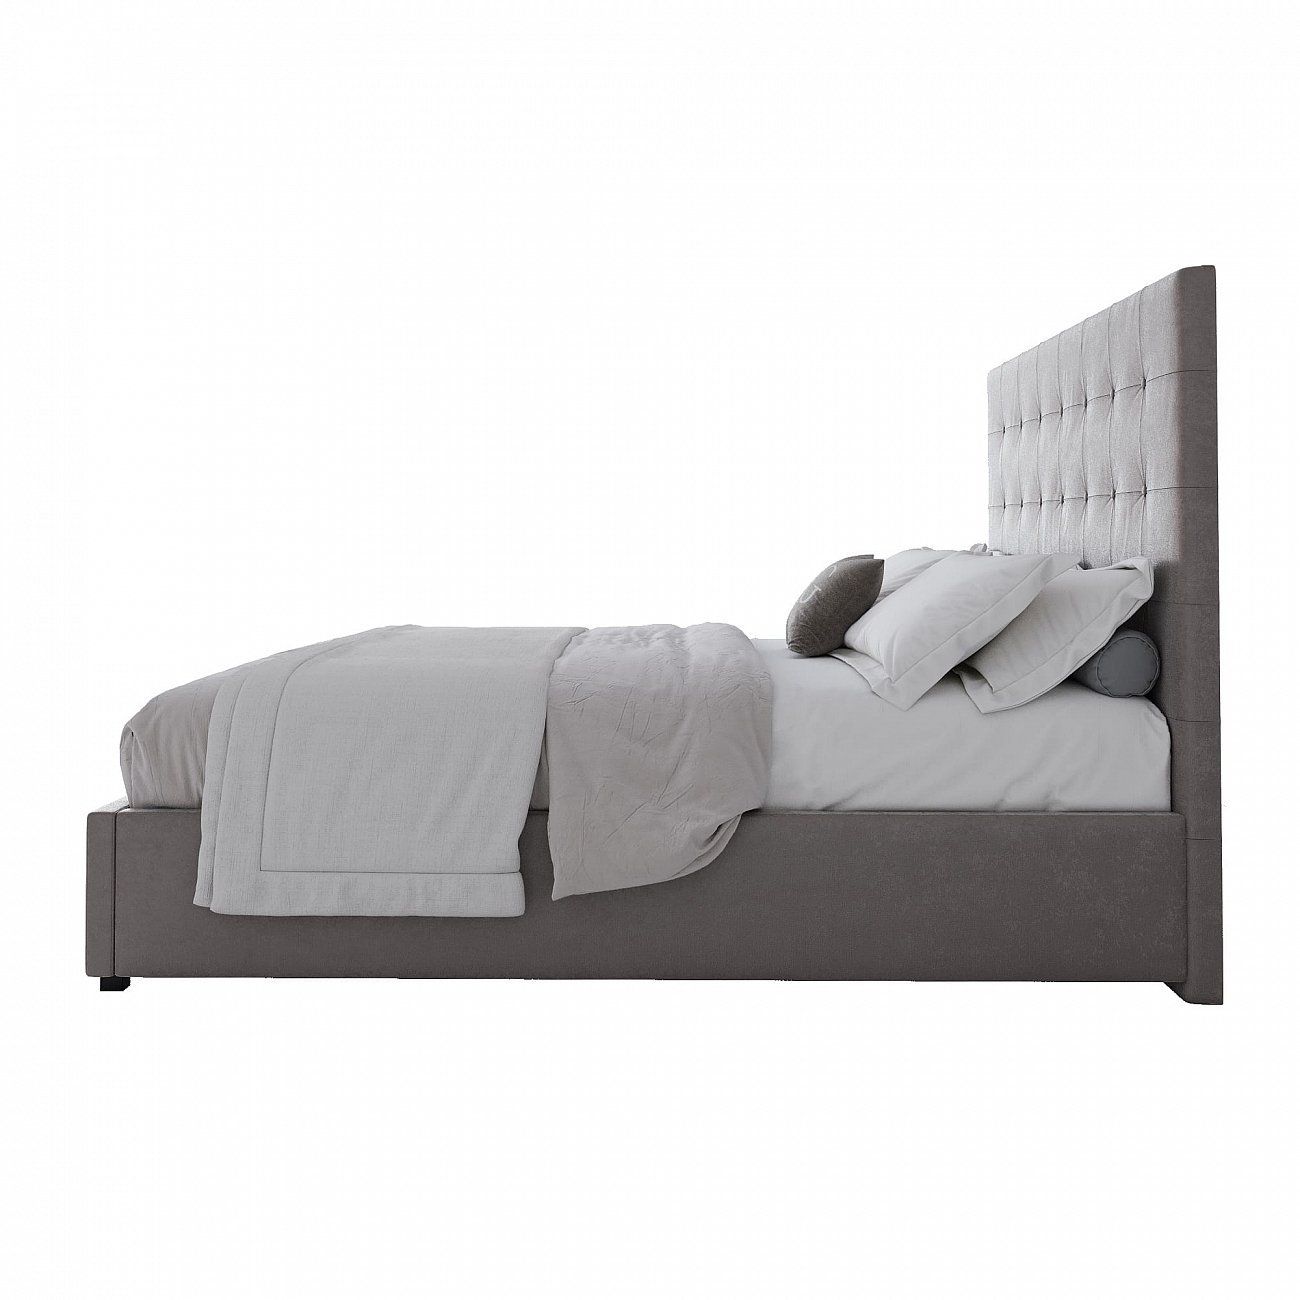 Double bed with upholstered headboard 160x200 cm light brown Royal Black